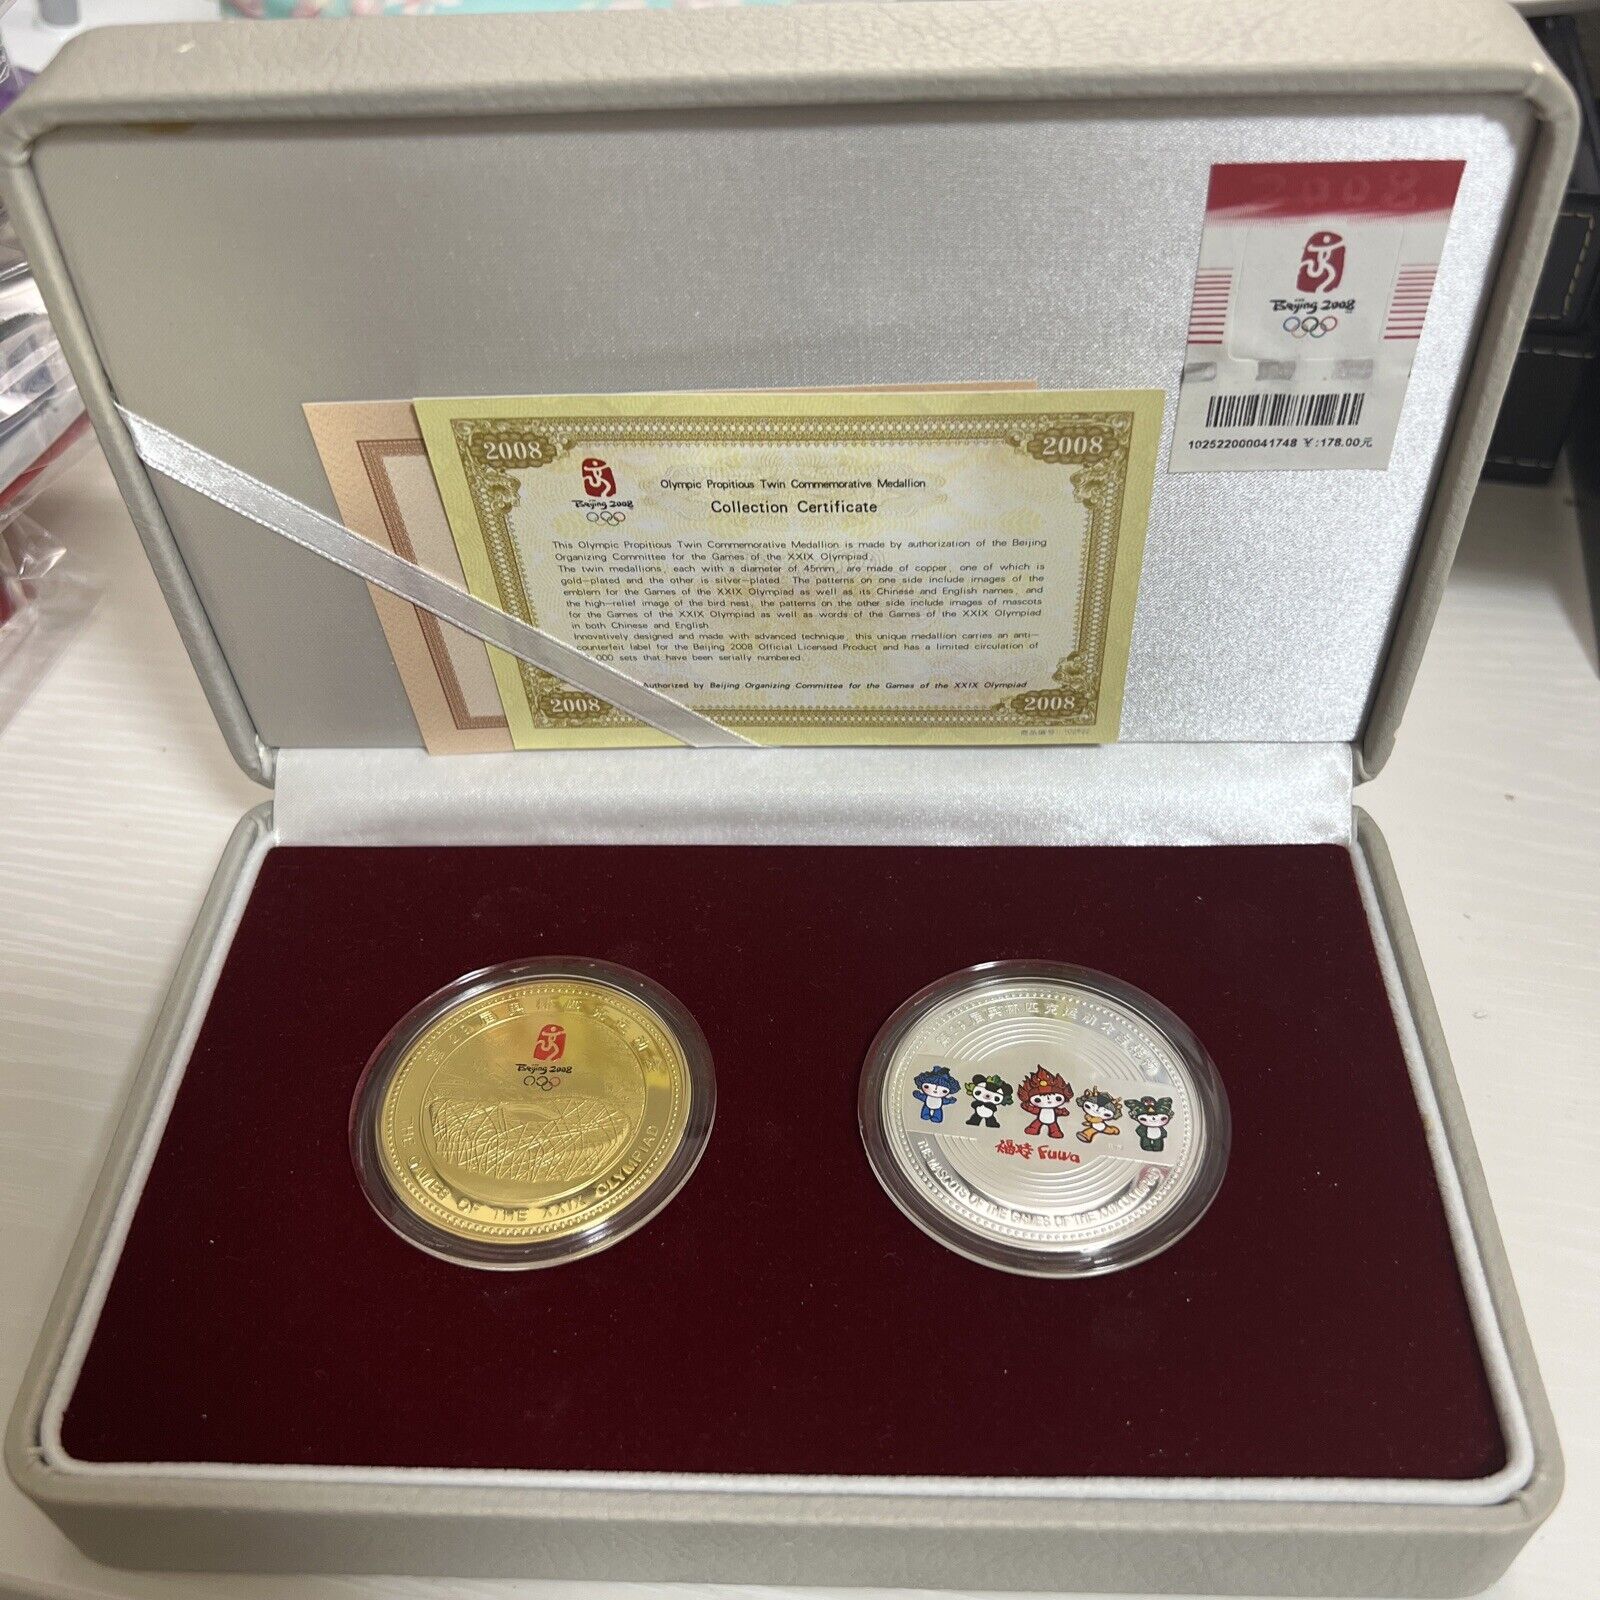 China BeiJing 2008 Olympic Commemorative Medal Set WMS#101